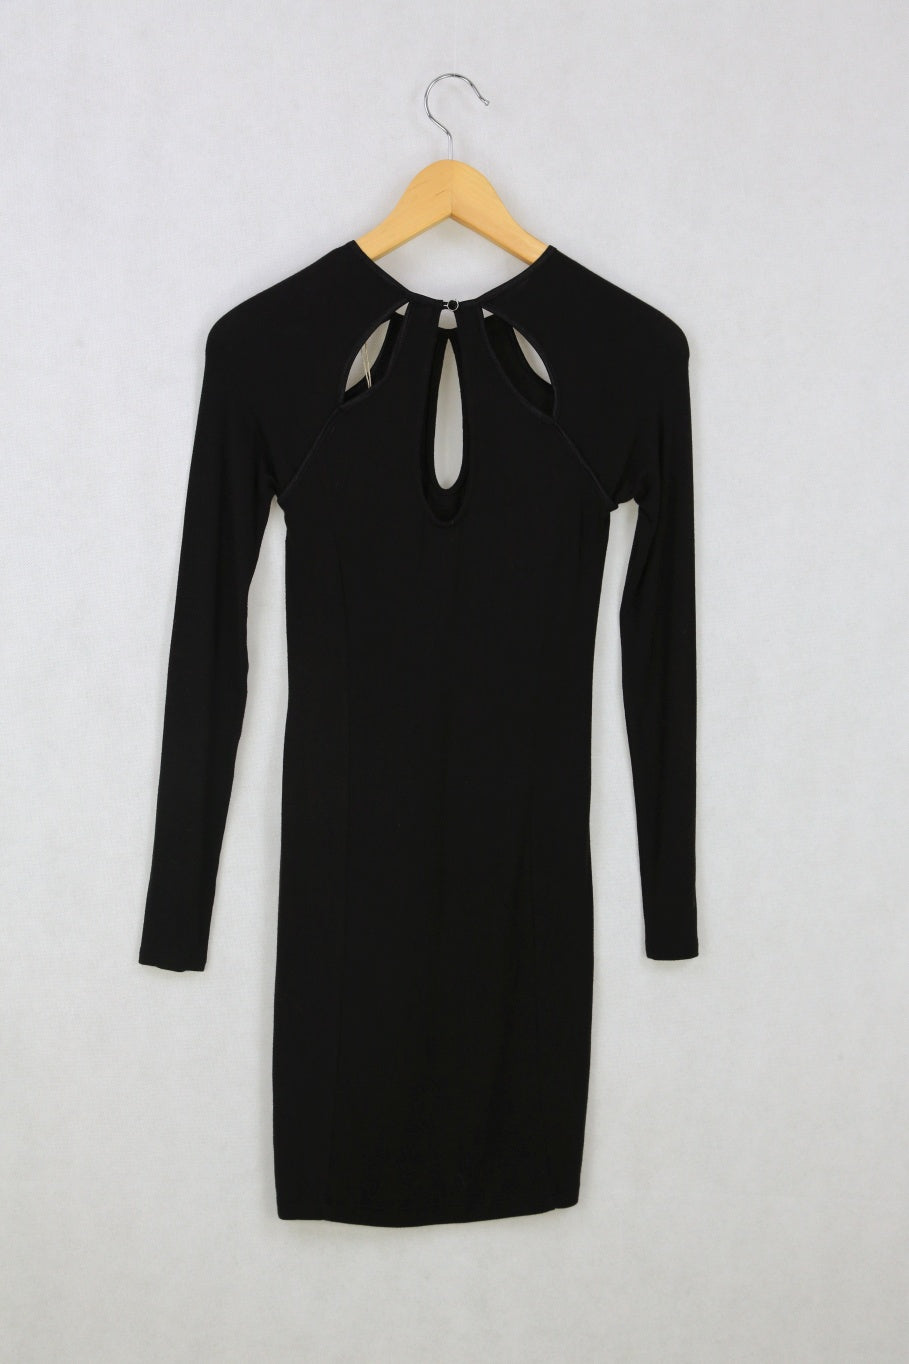 Guess Black Dress with Keyhole neckline  XS